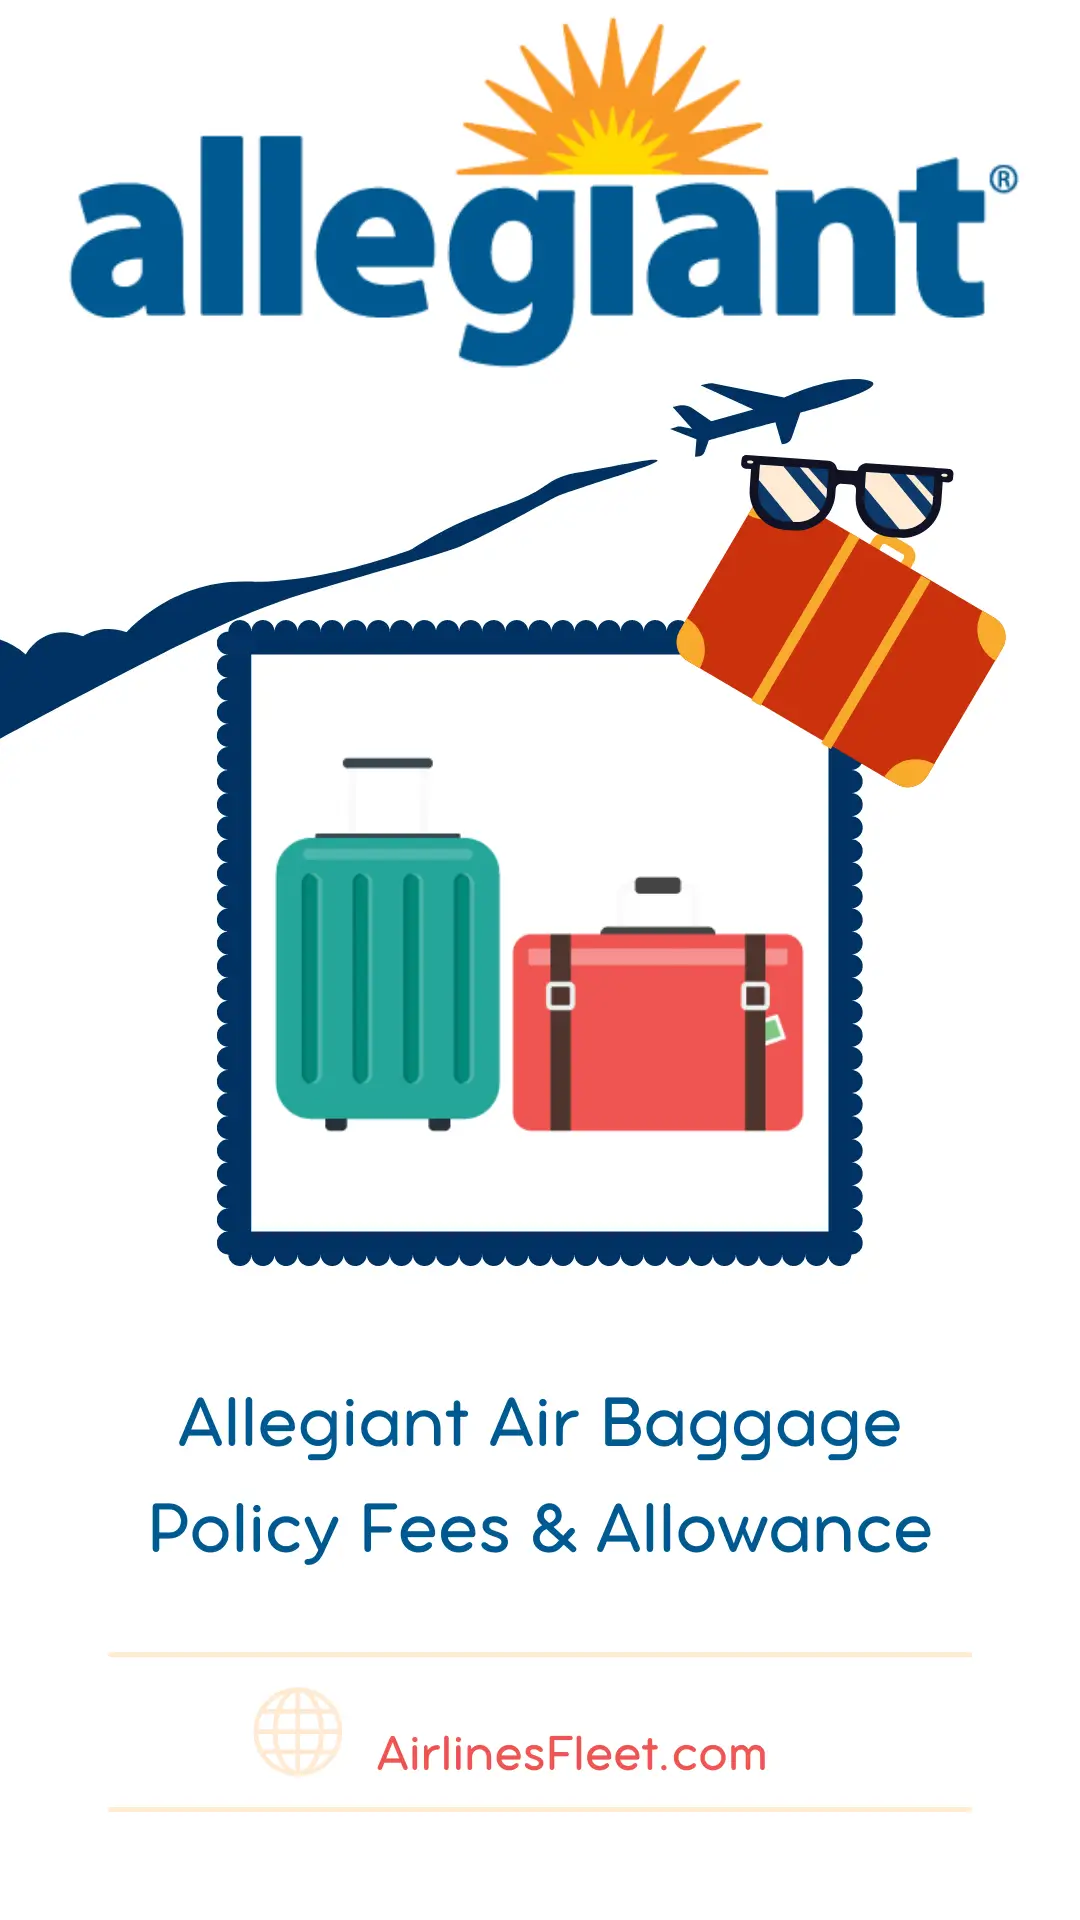 Allegiant Air Baggage Policy Fees & Allowance